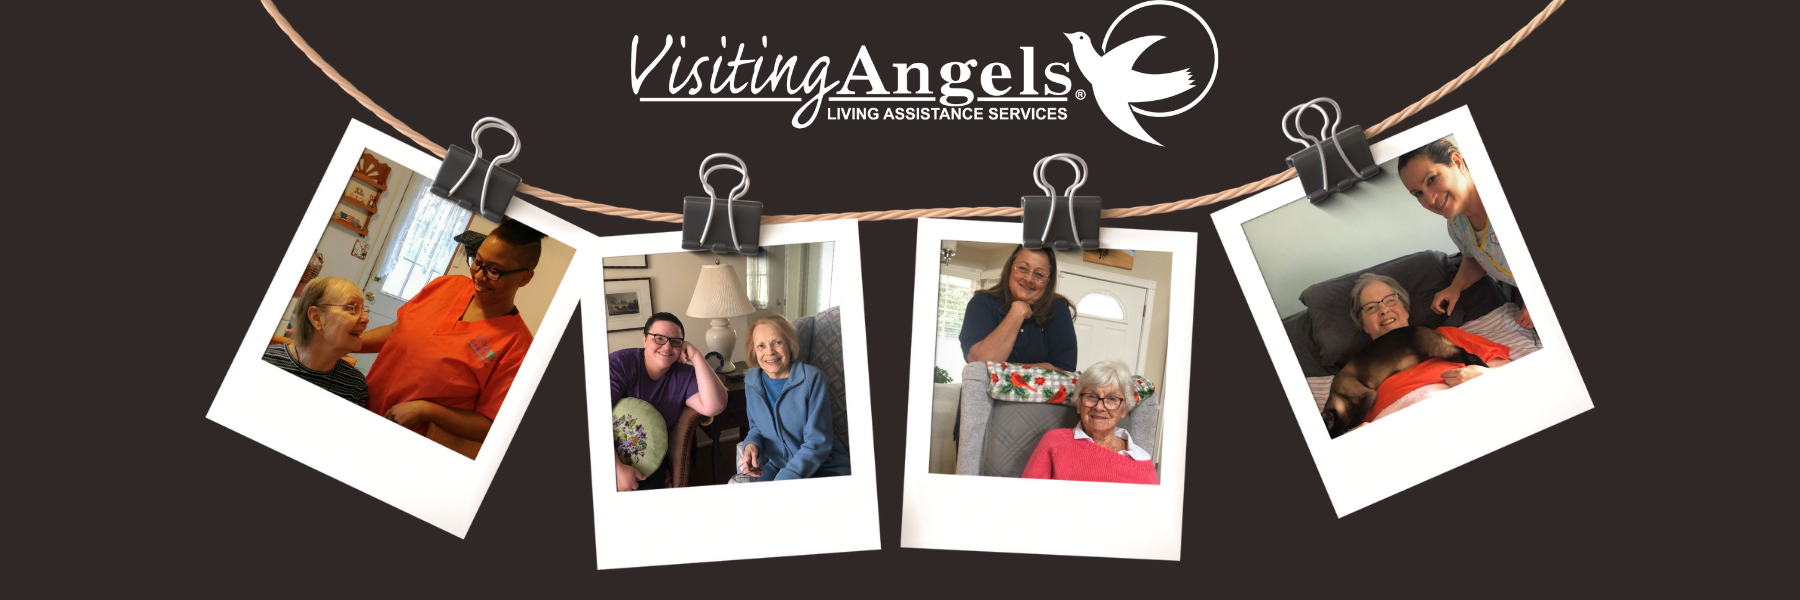 Photos of our caregivers providing in-home elderly care services to clients!